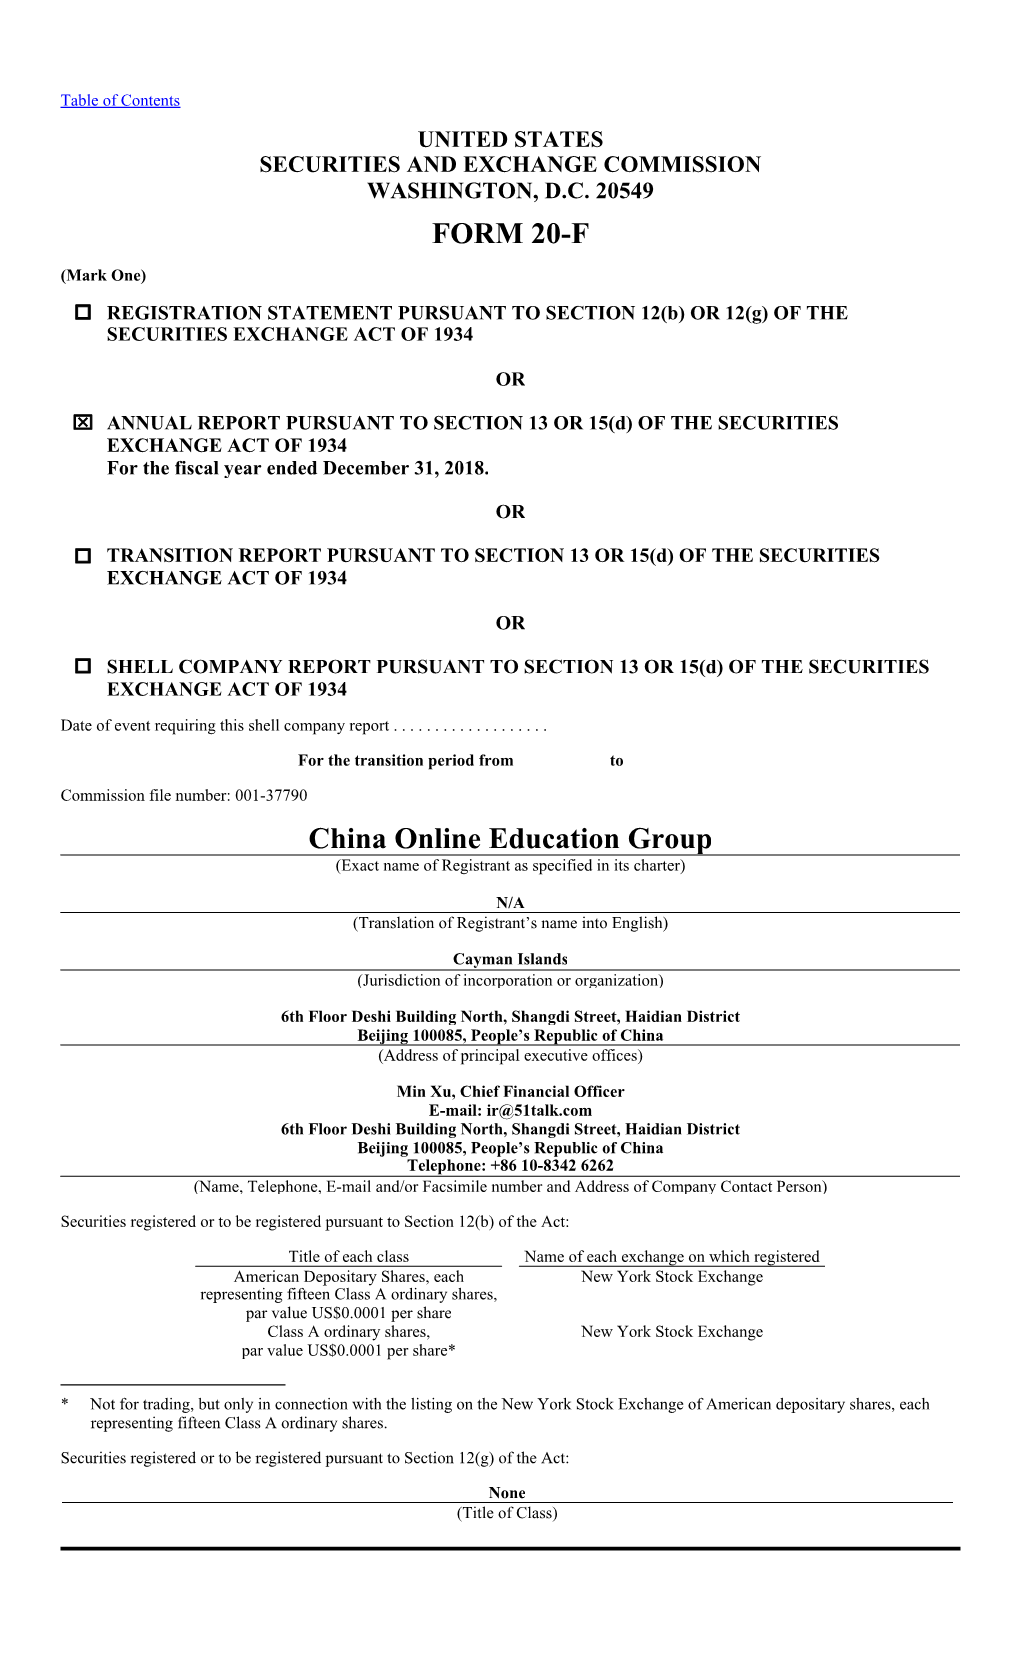 FORM 20-F China Online Education Group